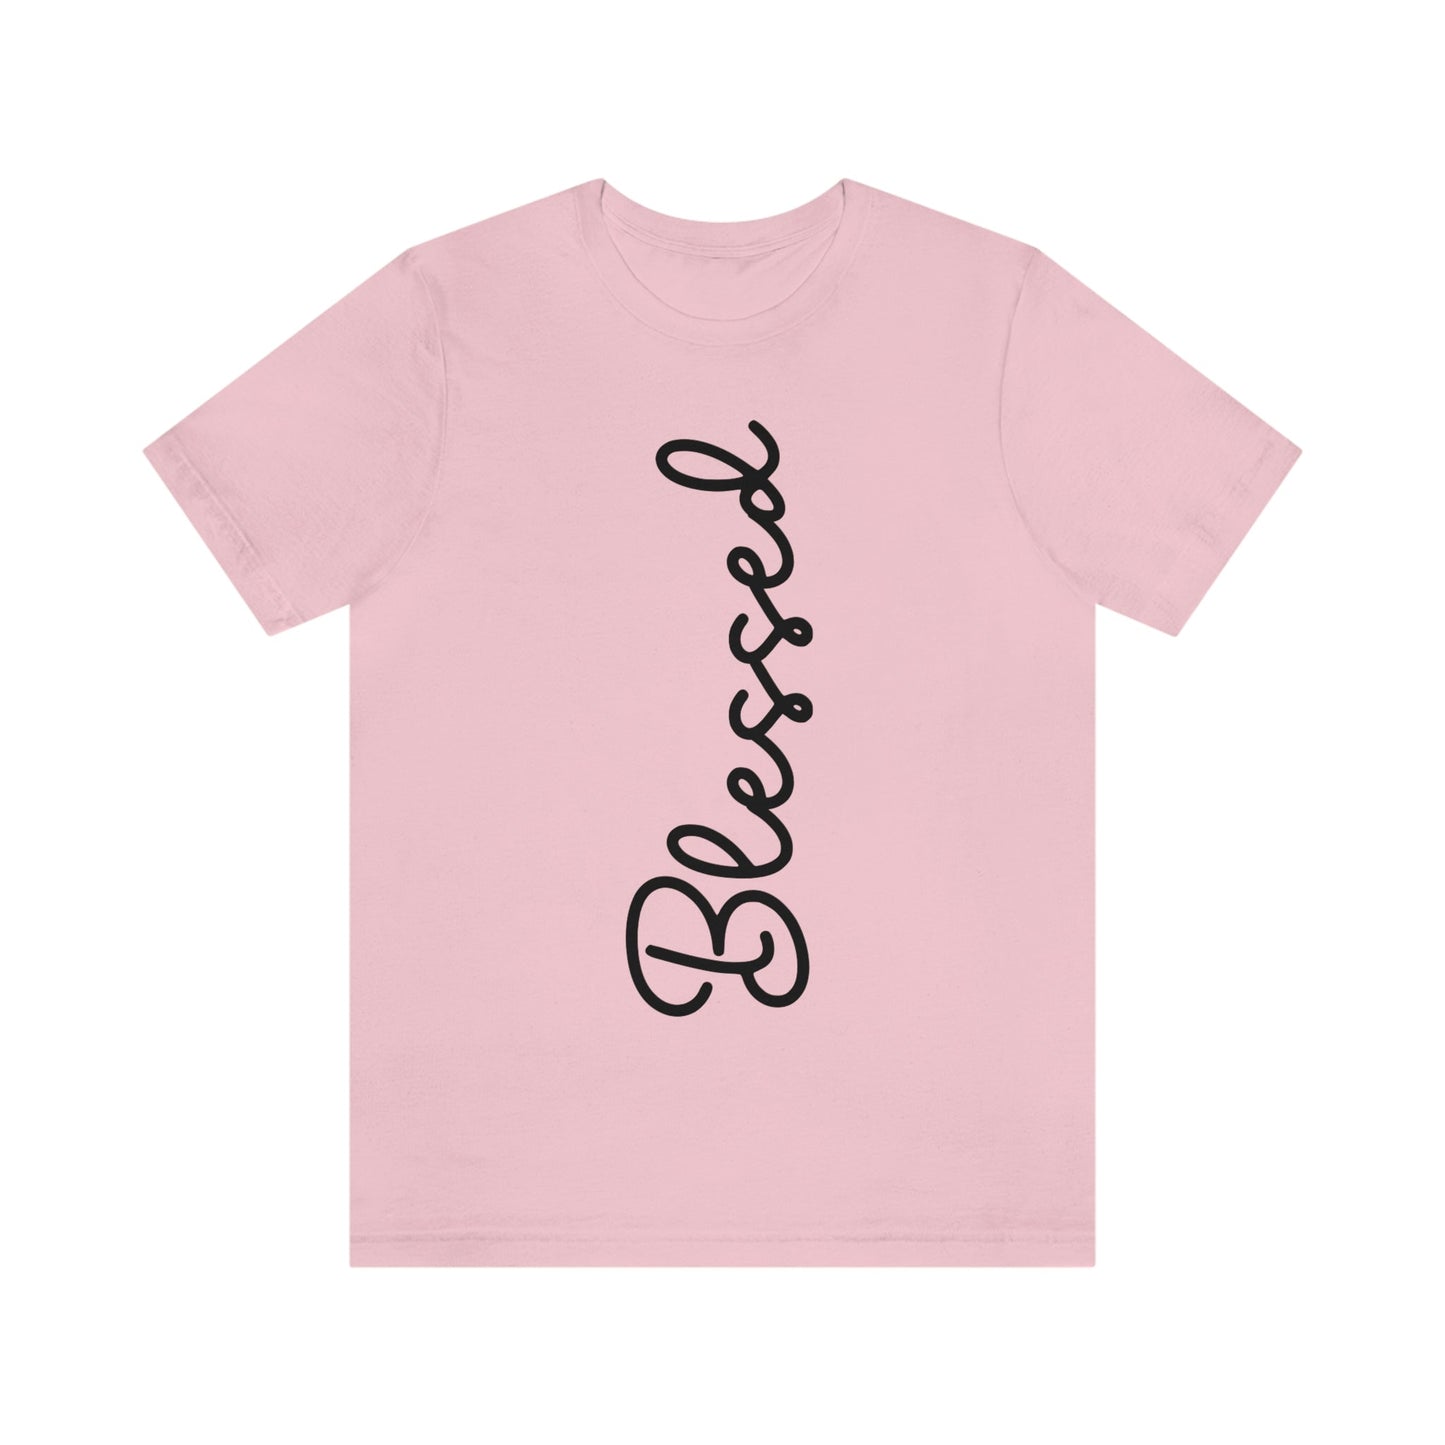 Blessed (Graphic Black Text) Unisex Jersey Short Sleeve Tee - Style: Bella+Canvas 3001